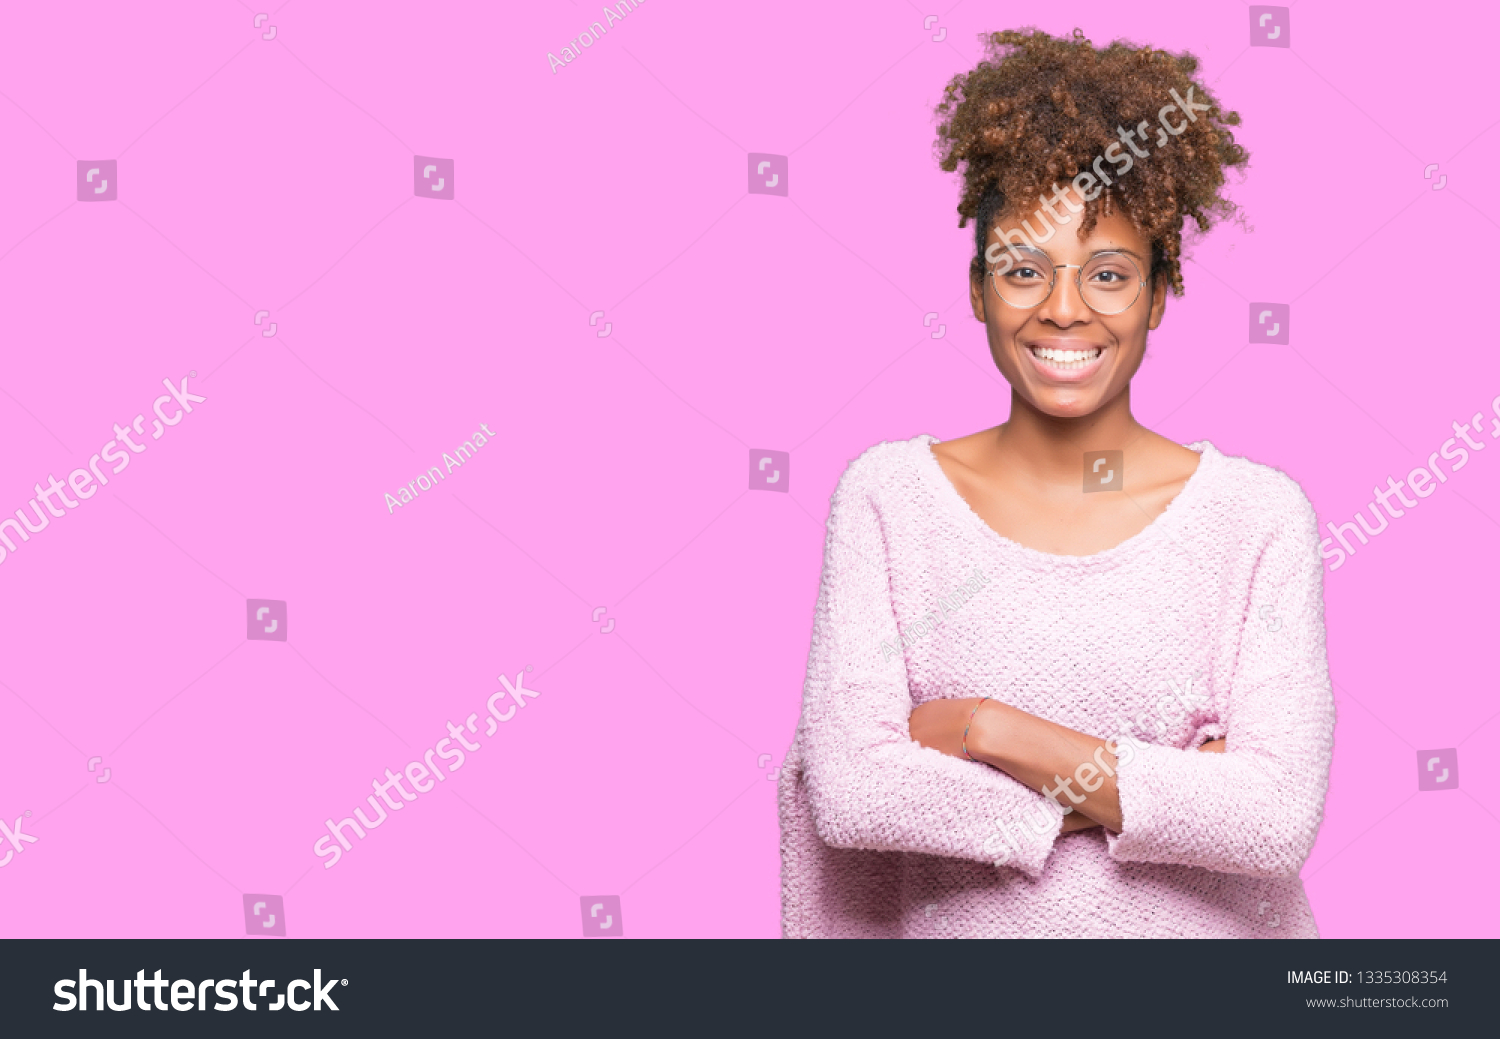 Beautiful young african american woman wearing glasses over isolated background happy face smiling with crossed arms looking at the camera. Positive person. #1335308354